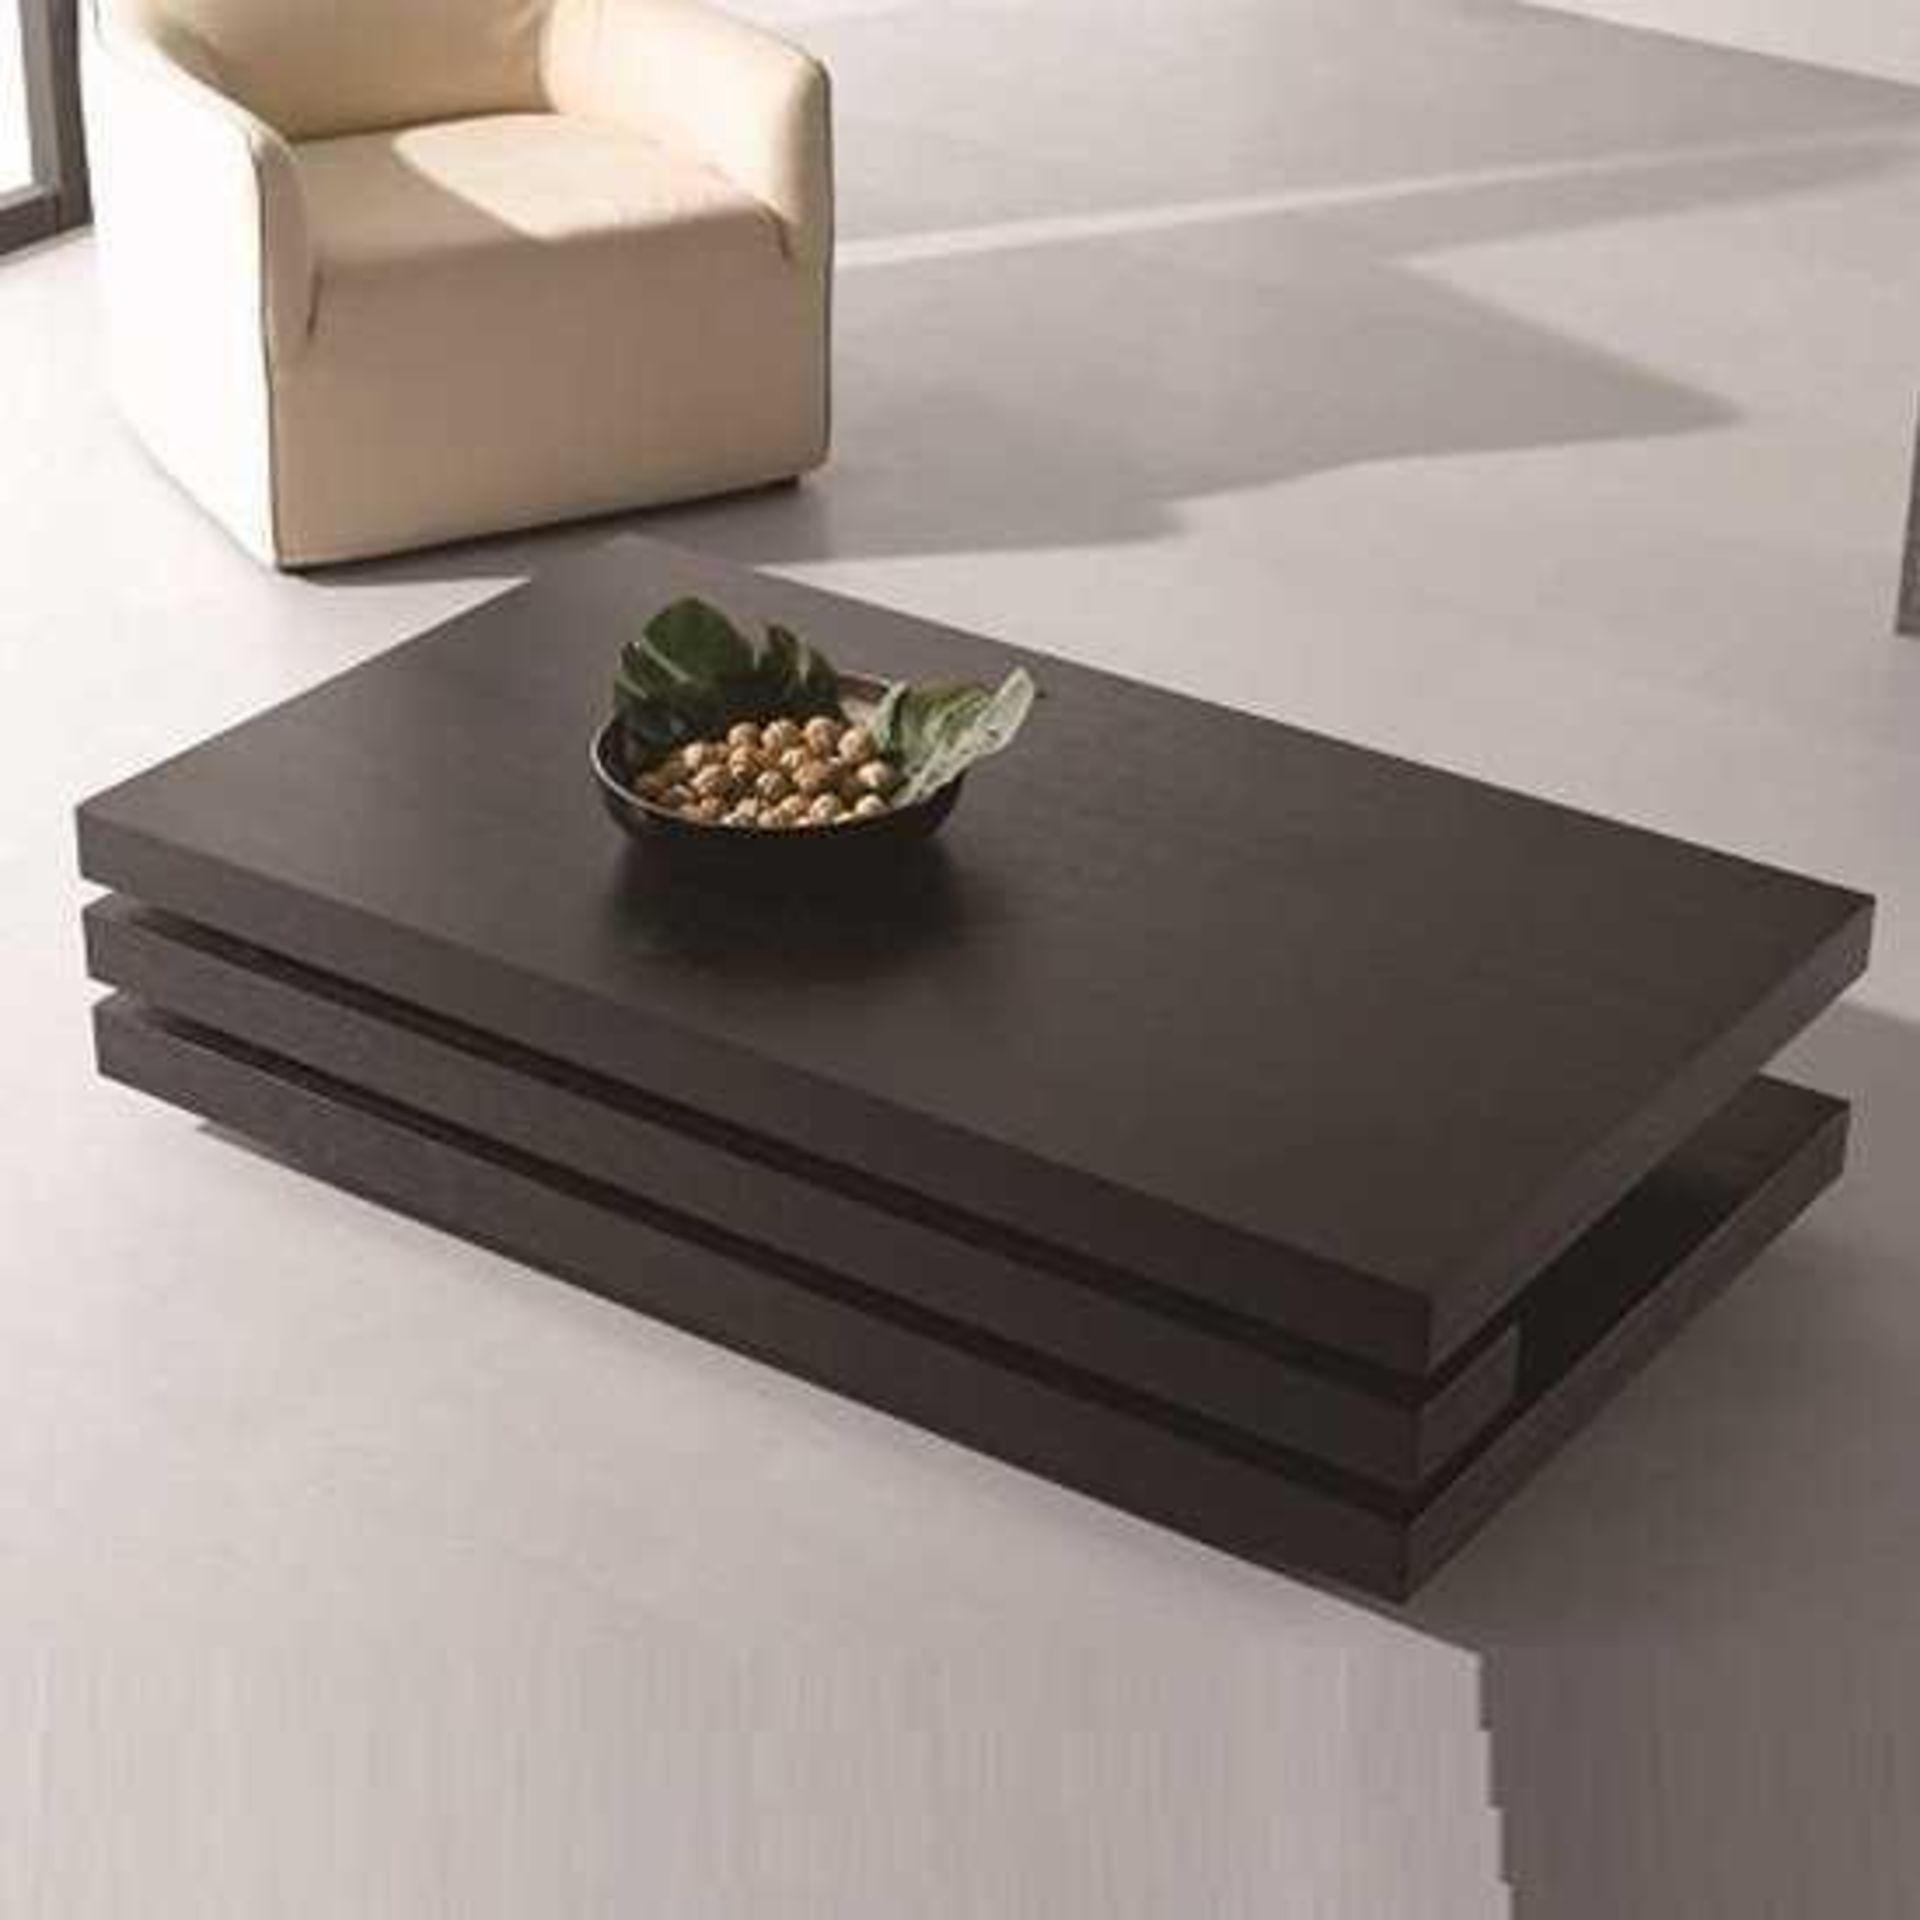 RRP £270 - Boxed 'Palma' Rectangular Coffee Table In Black Oak Veneer (Appraisals Available On